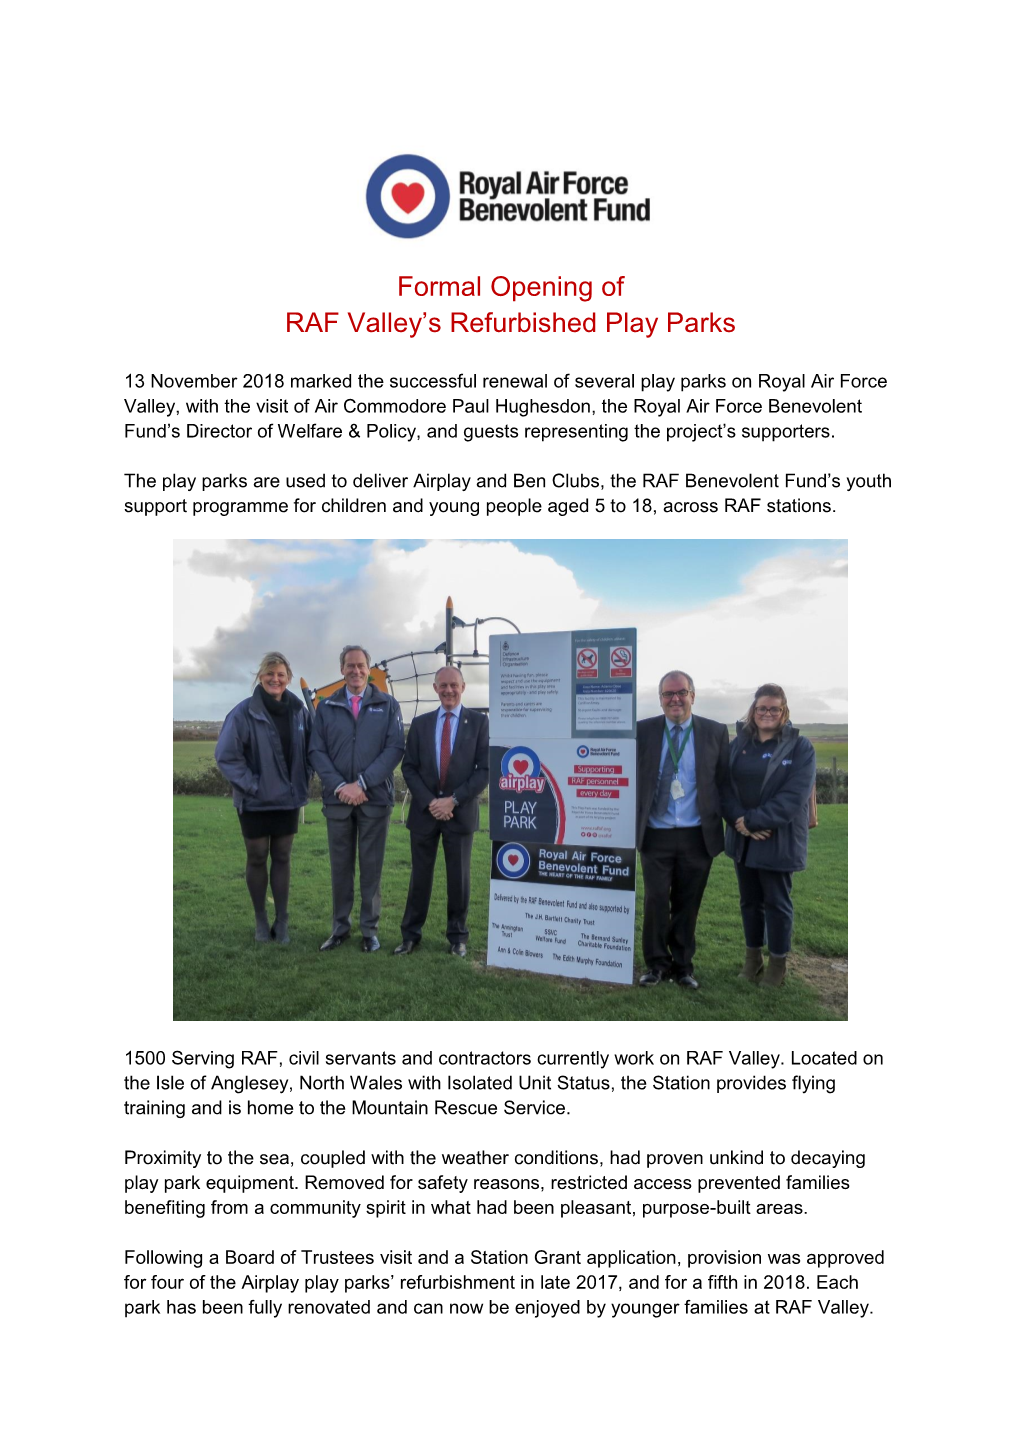 Formal Opening of RAF Valley's Refurbished Play Parks